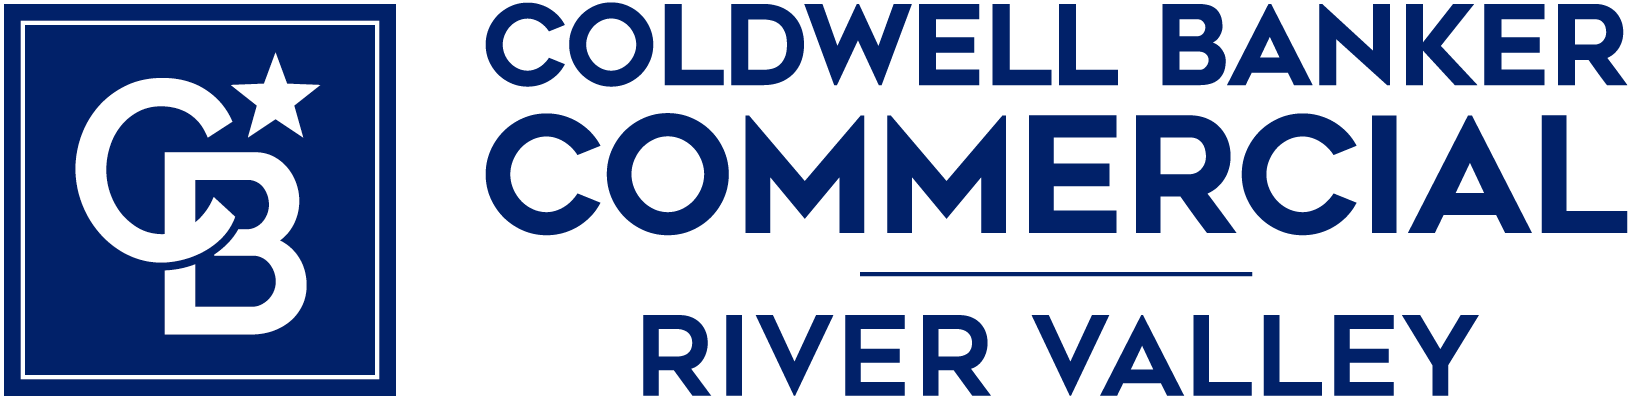 Adam Weissenberger - Coldwell Banker River Valley Commercial Group Logo